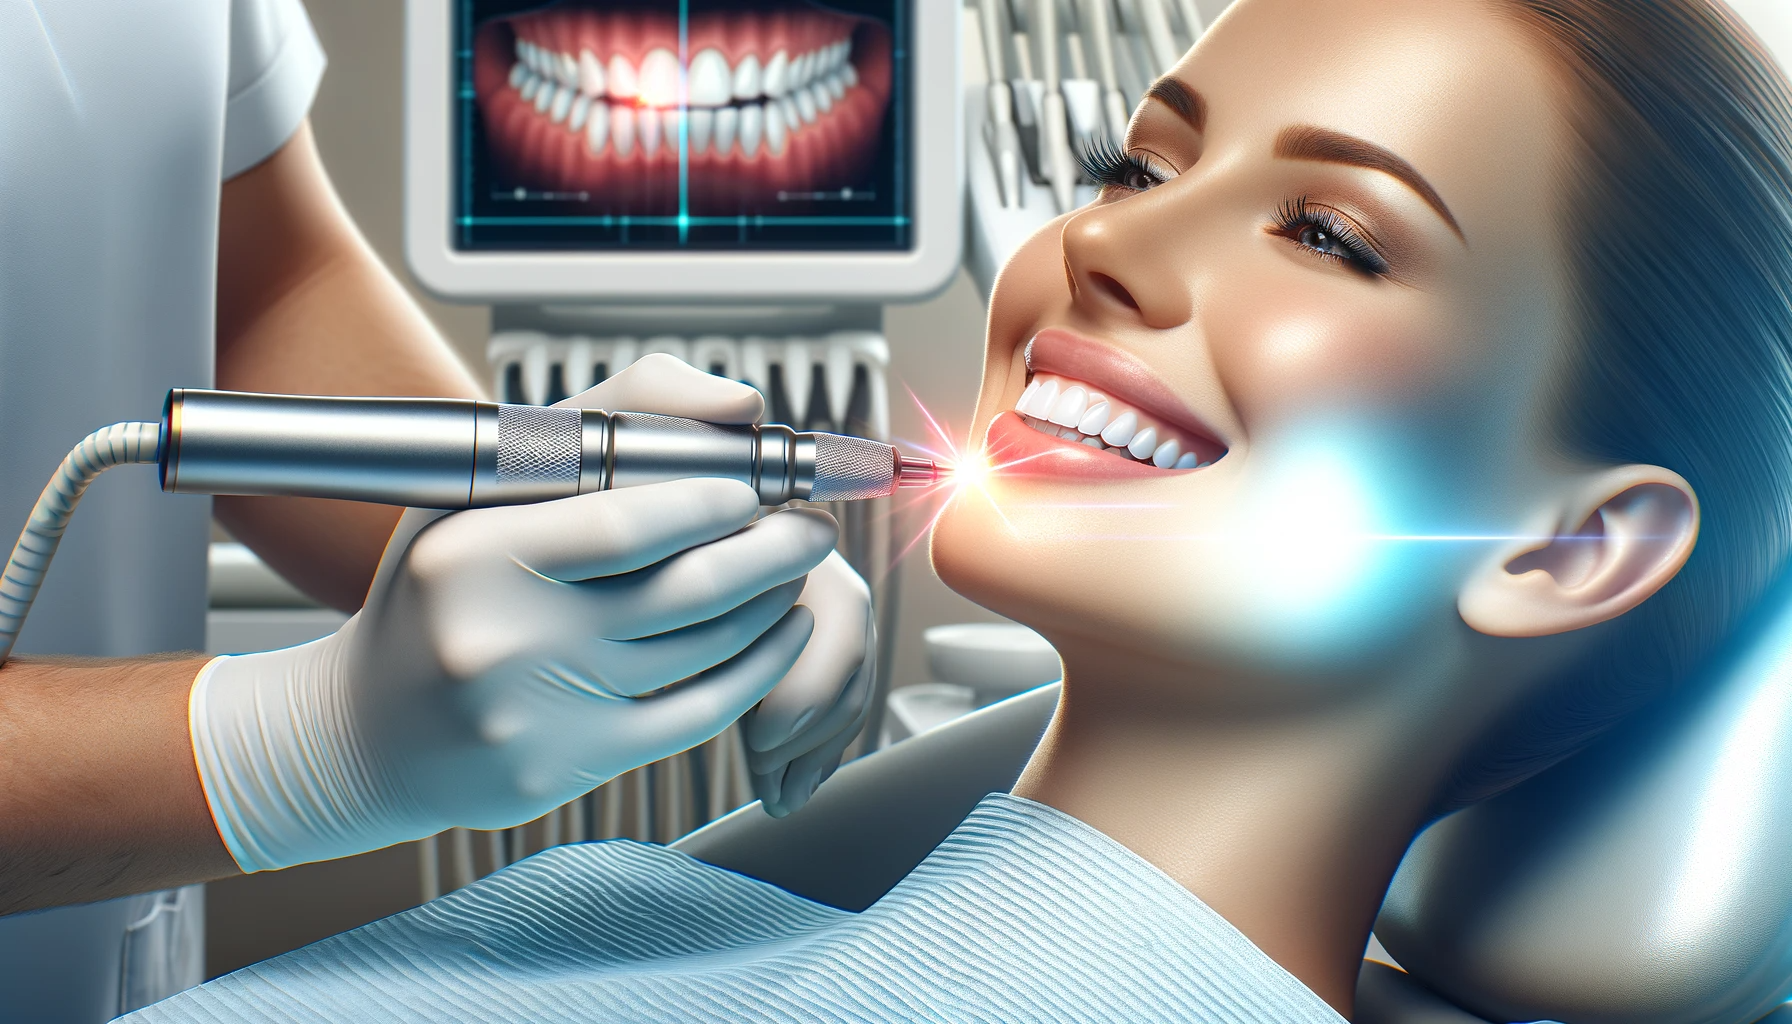 Are there risks or potential side effects with cosmetic dentistry?